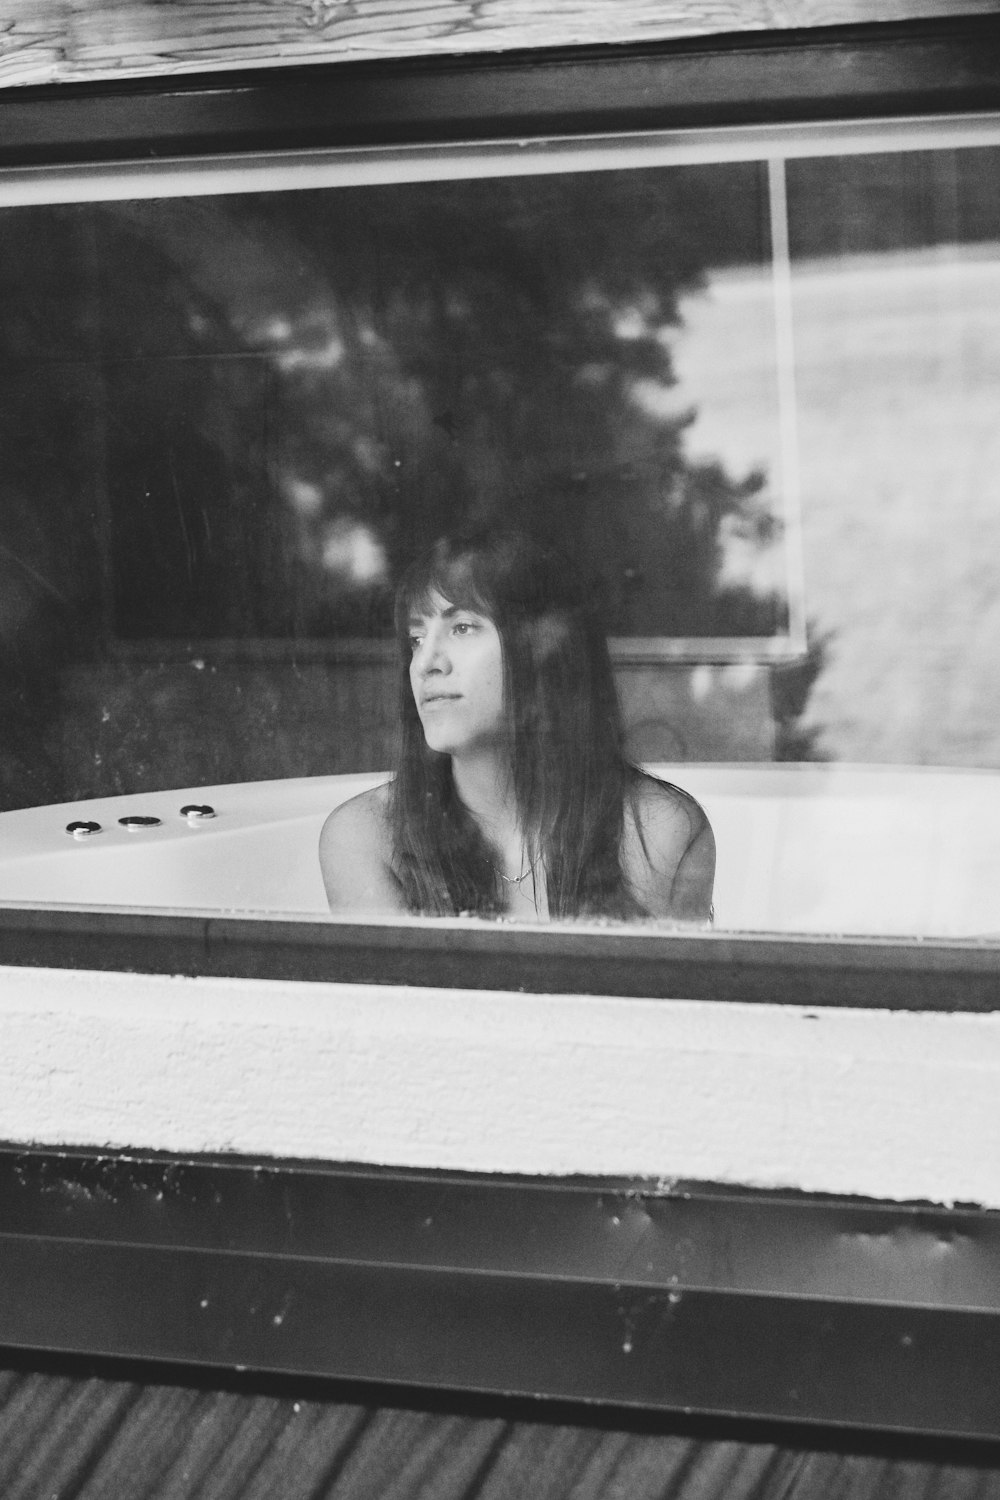 a woman sitting in a bathtub looking out the window